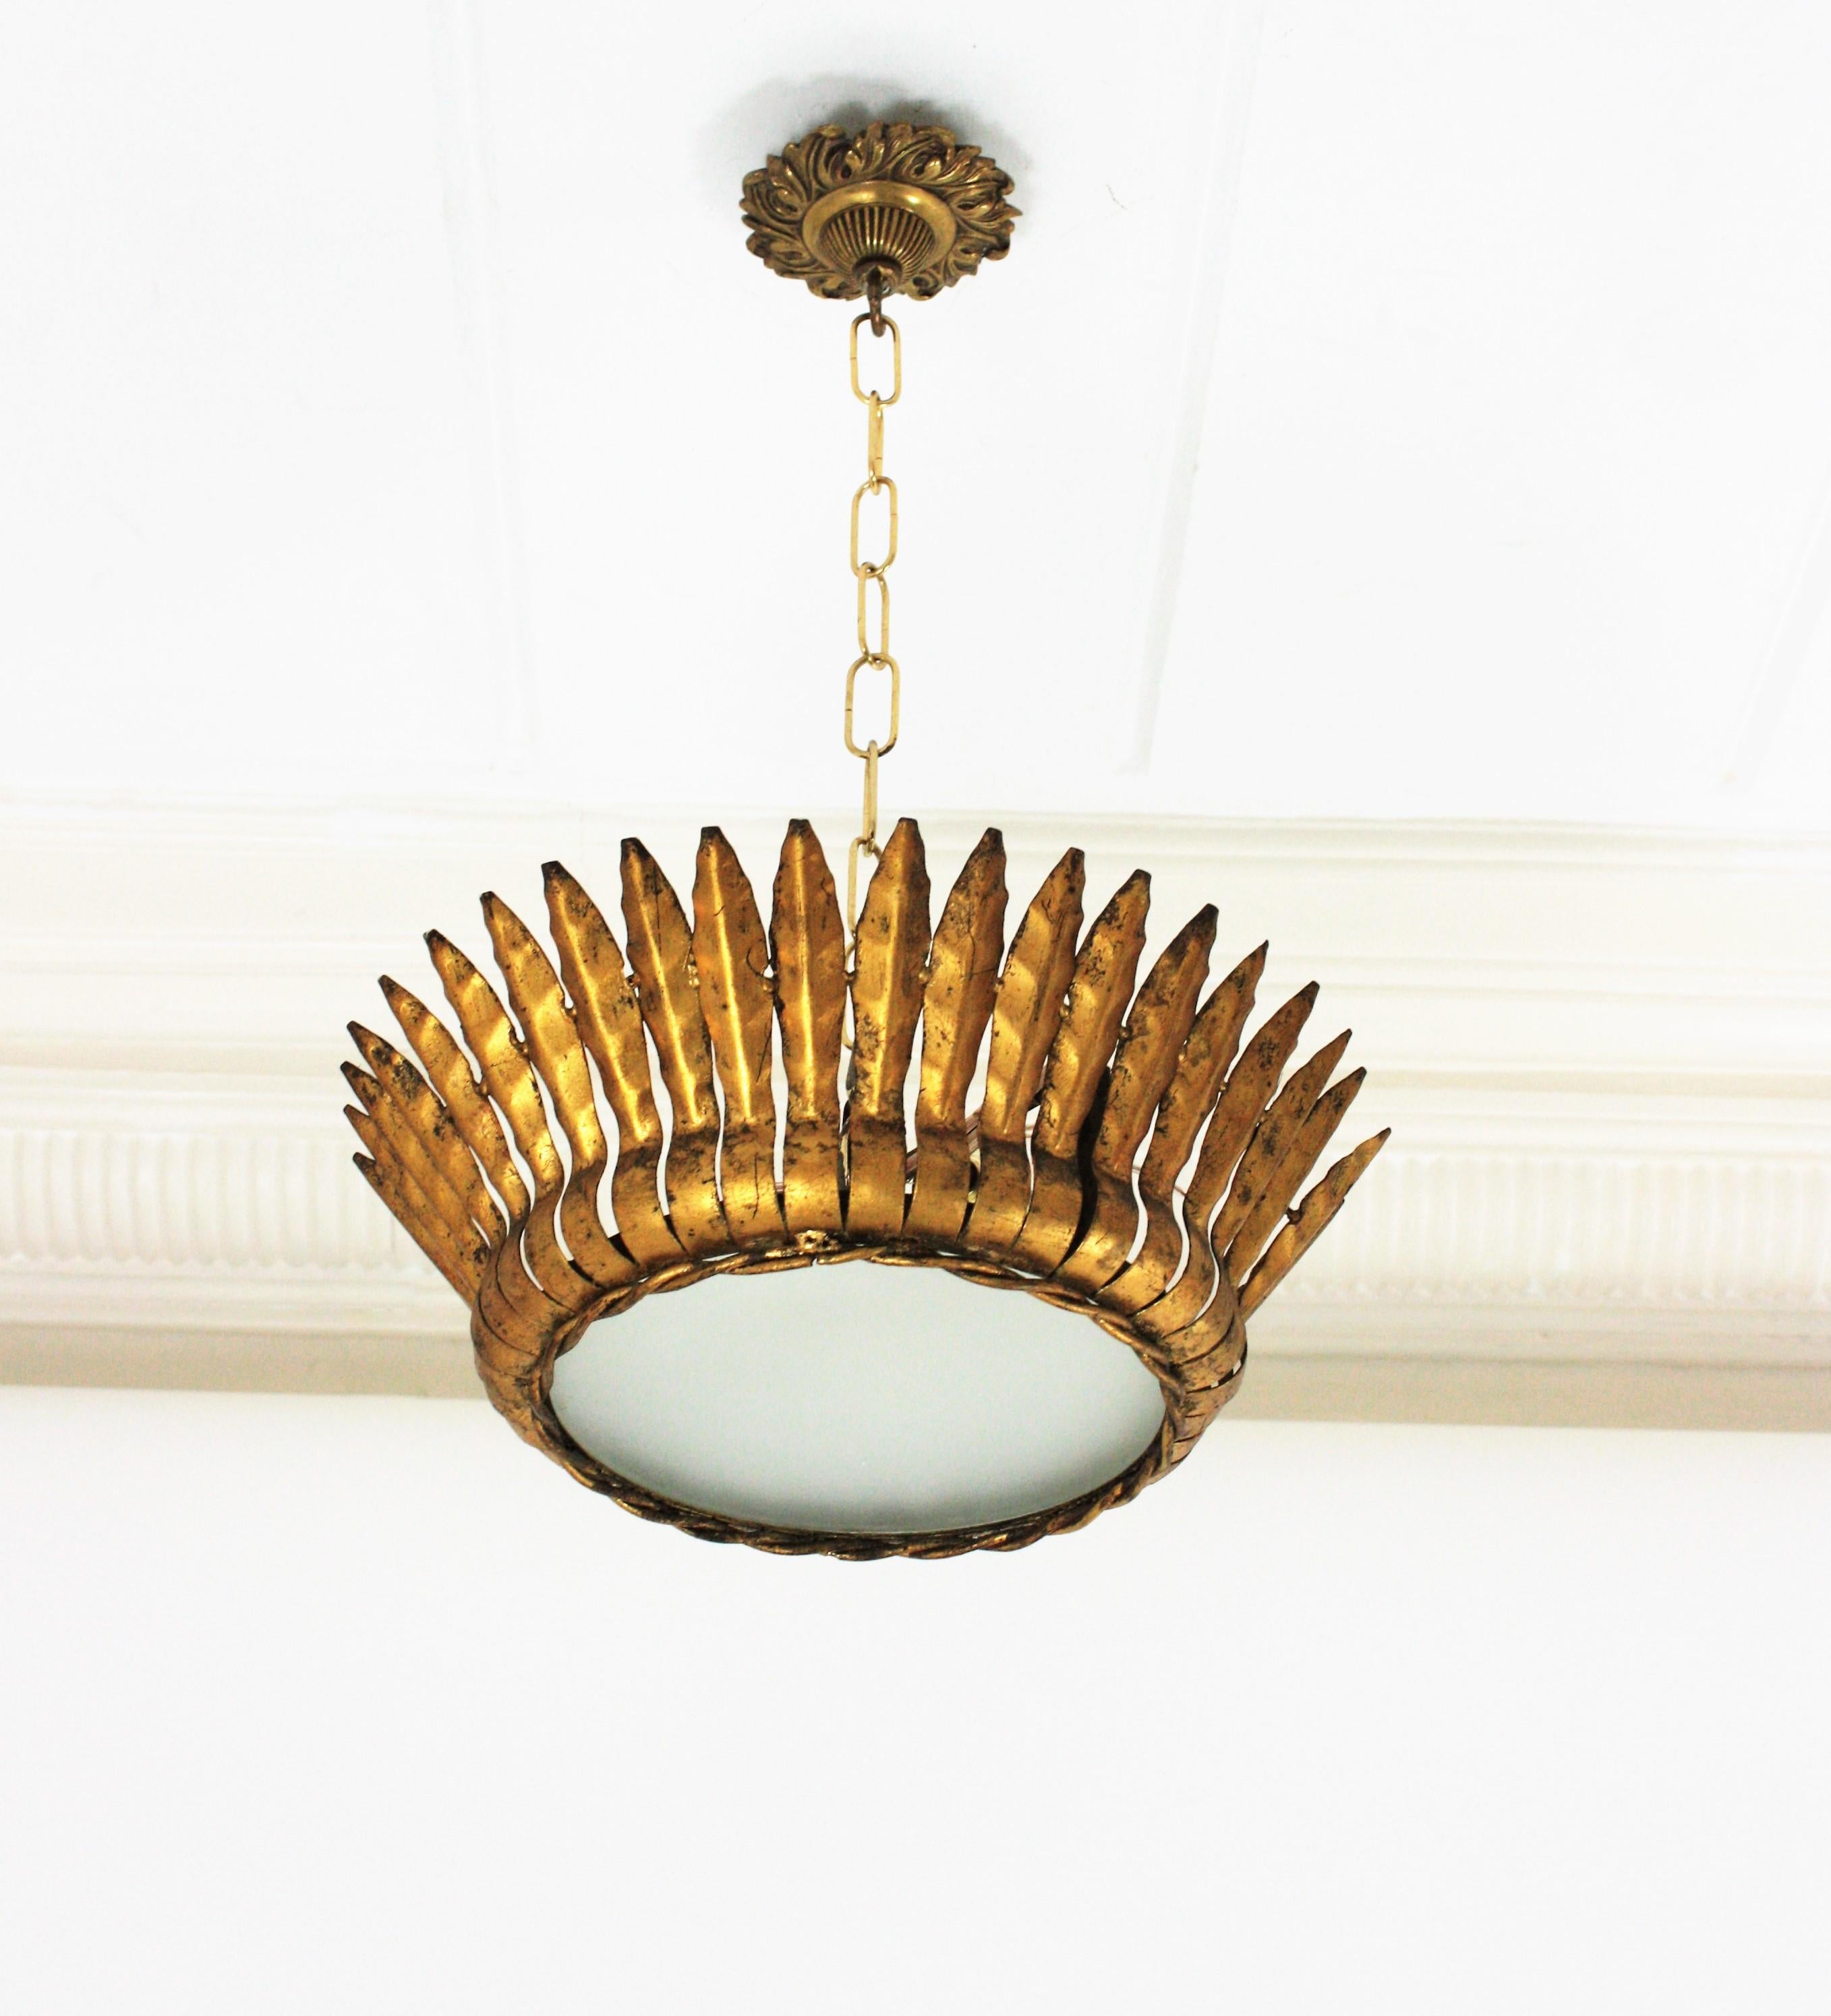 Pair of Mid-Century Modern gilt iron crown sunburst flush mounts or pendant with leaf motifs surrounding a central frosted glass diffuser, Spain, 1950s.
Handcrafted in hand-hammered iron with gold leaf finishing. They have a twisted iron rope